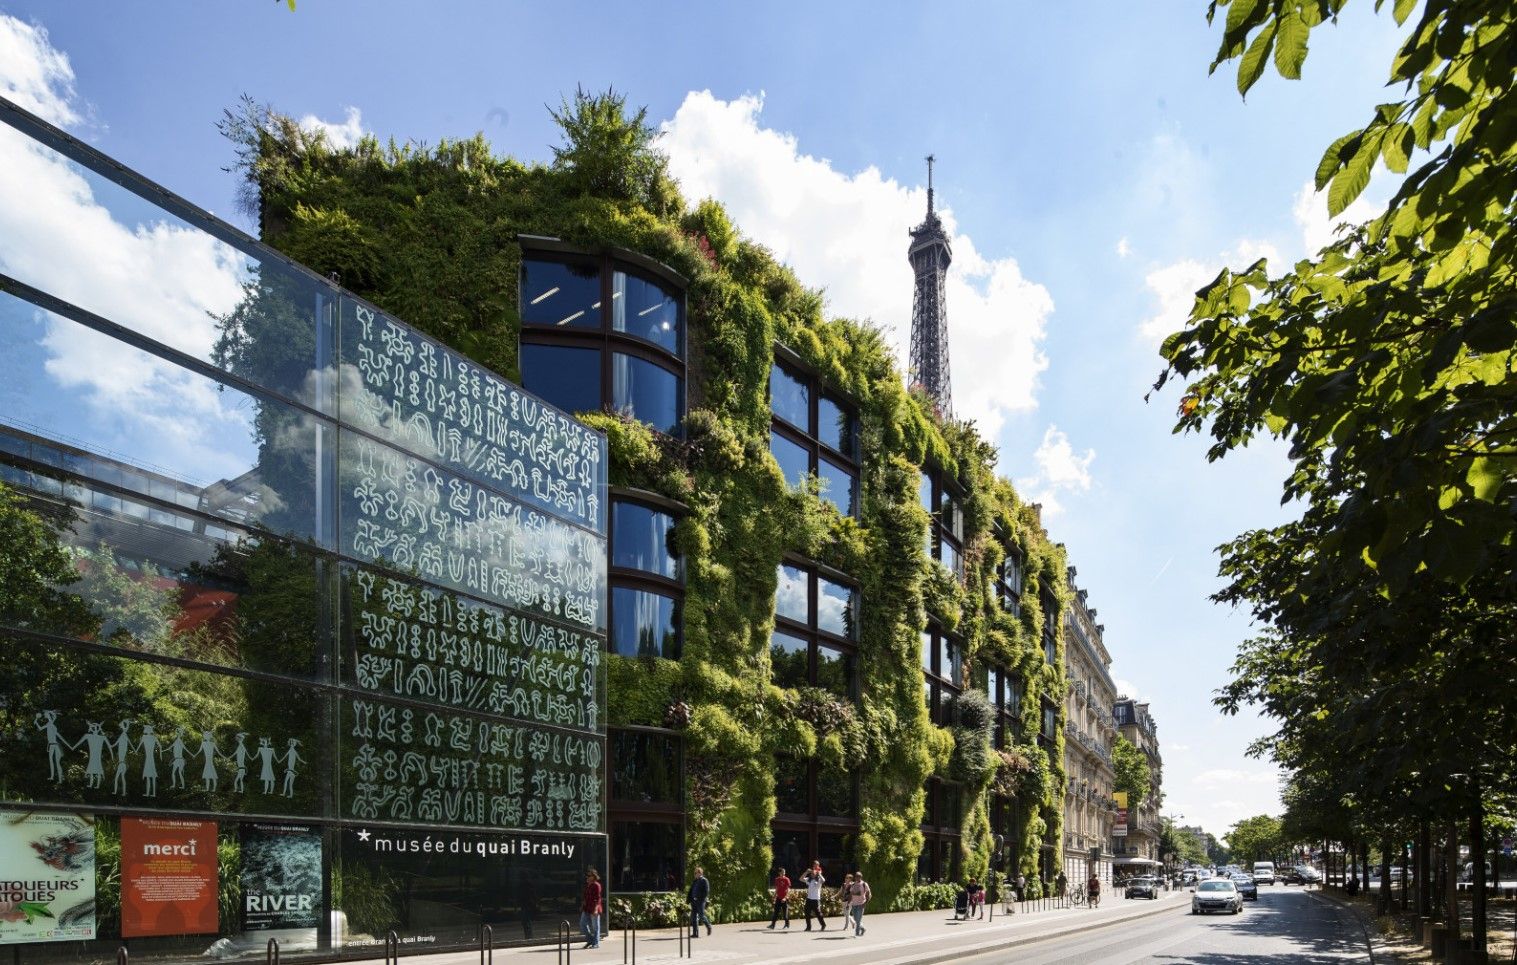 Musée du quai Branly - Things To Do at Champ de Mars Arena Paris Olympics 2024 | Top Attractions, Night Life, Restaurants